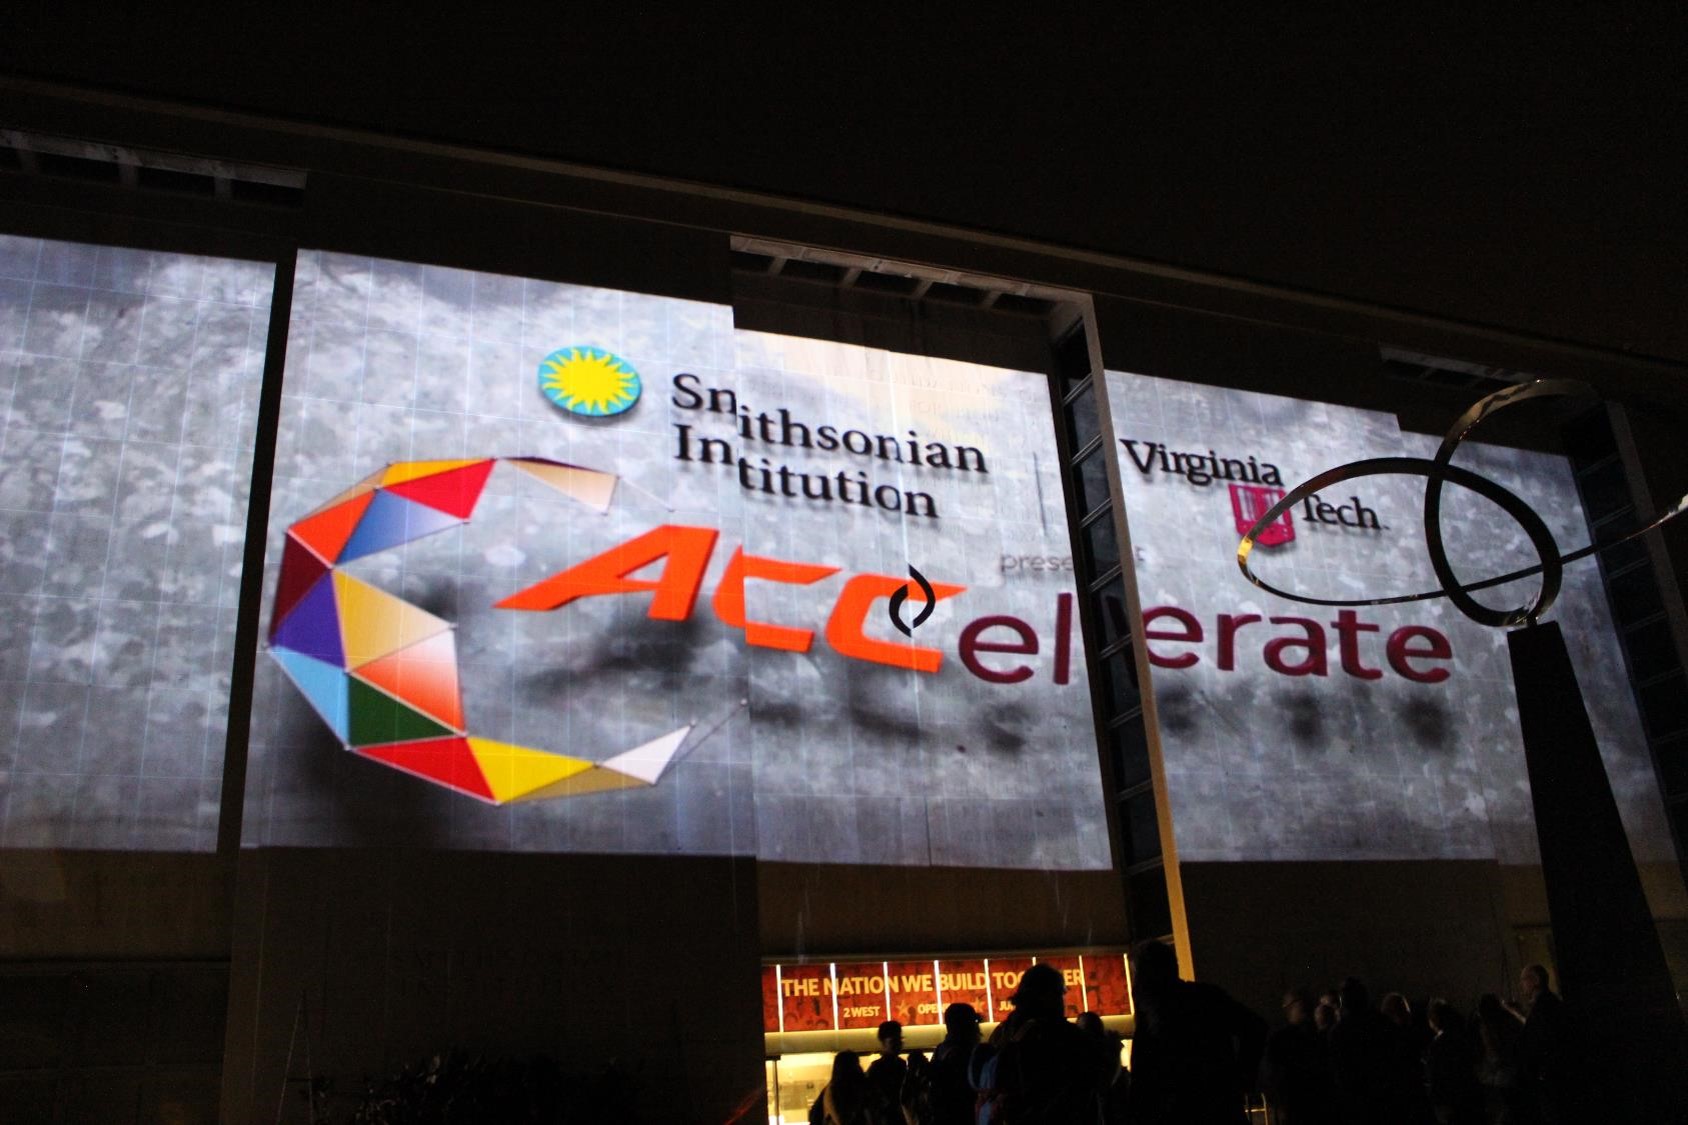 A projection of the ACCelerate logo is displayed on the exterior of the Smithsonian National Museum of American History.